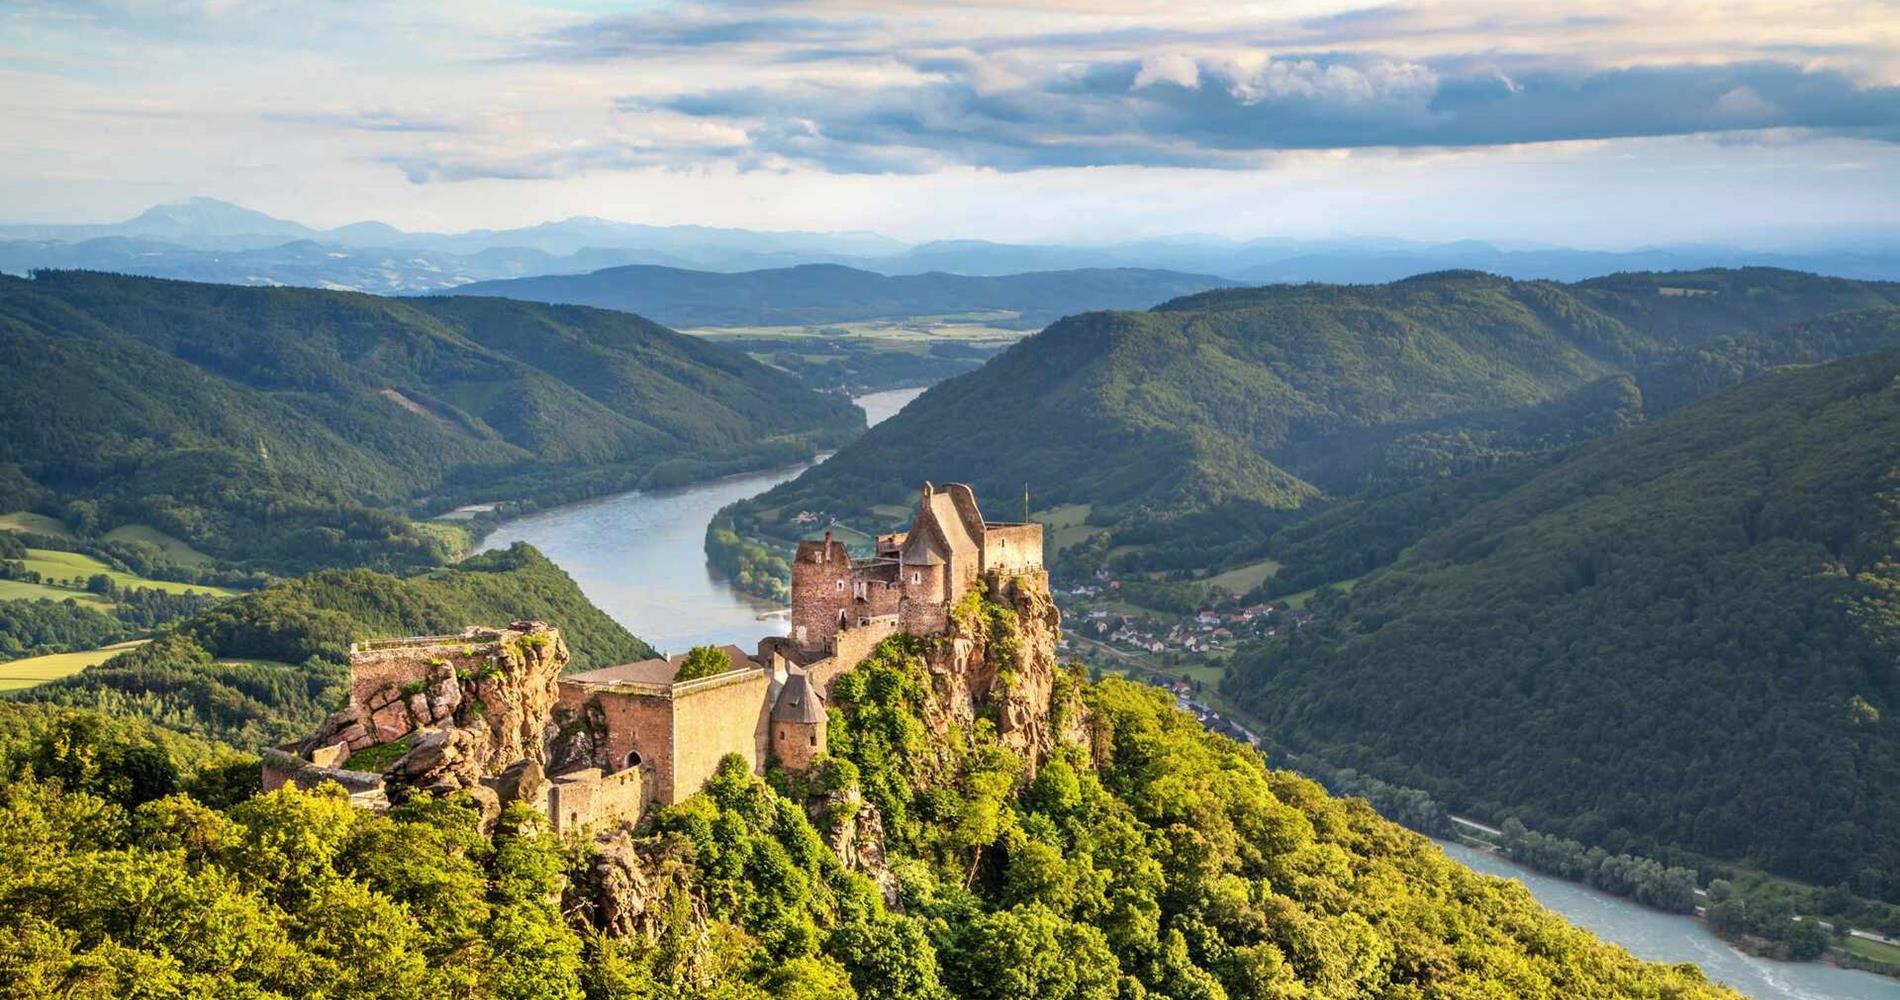 A castle on a cliff above the Danube river